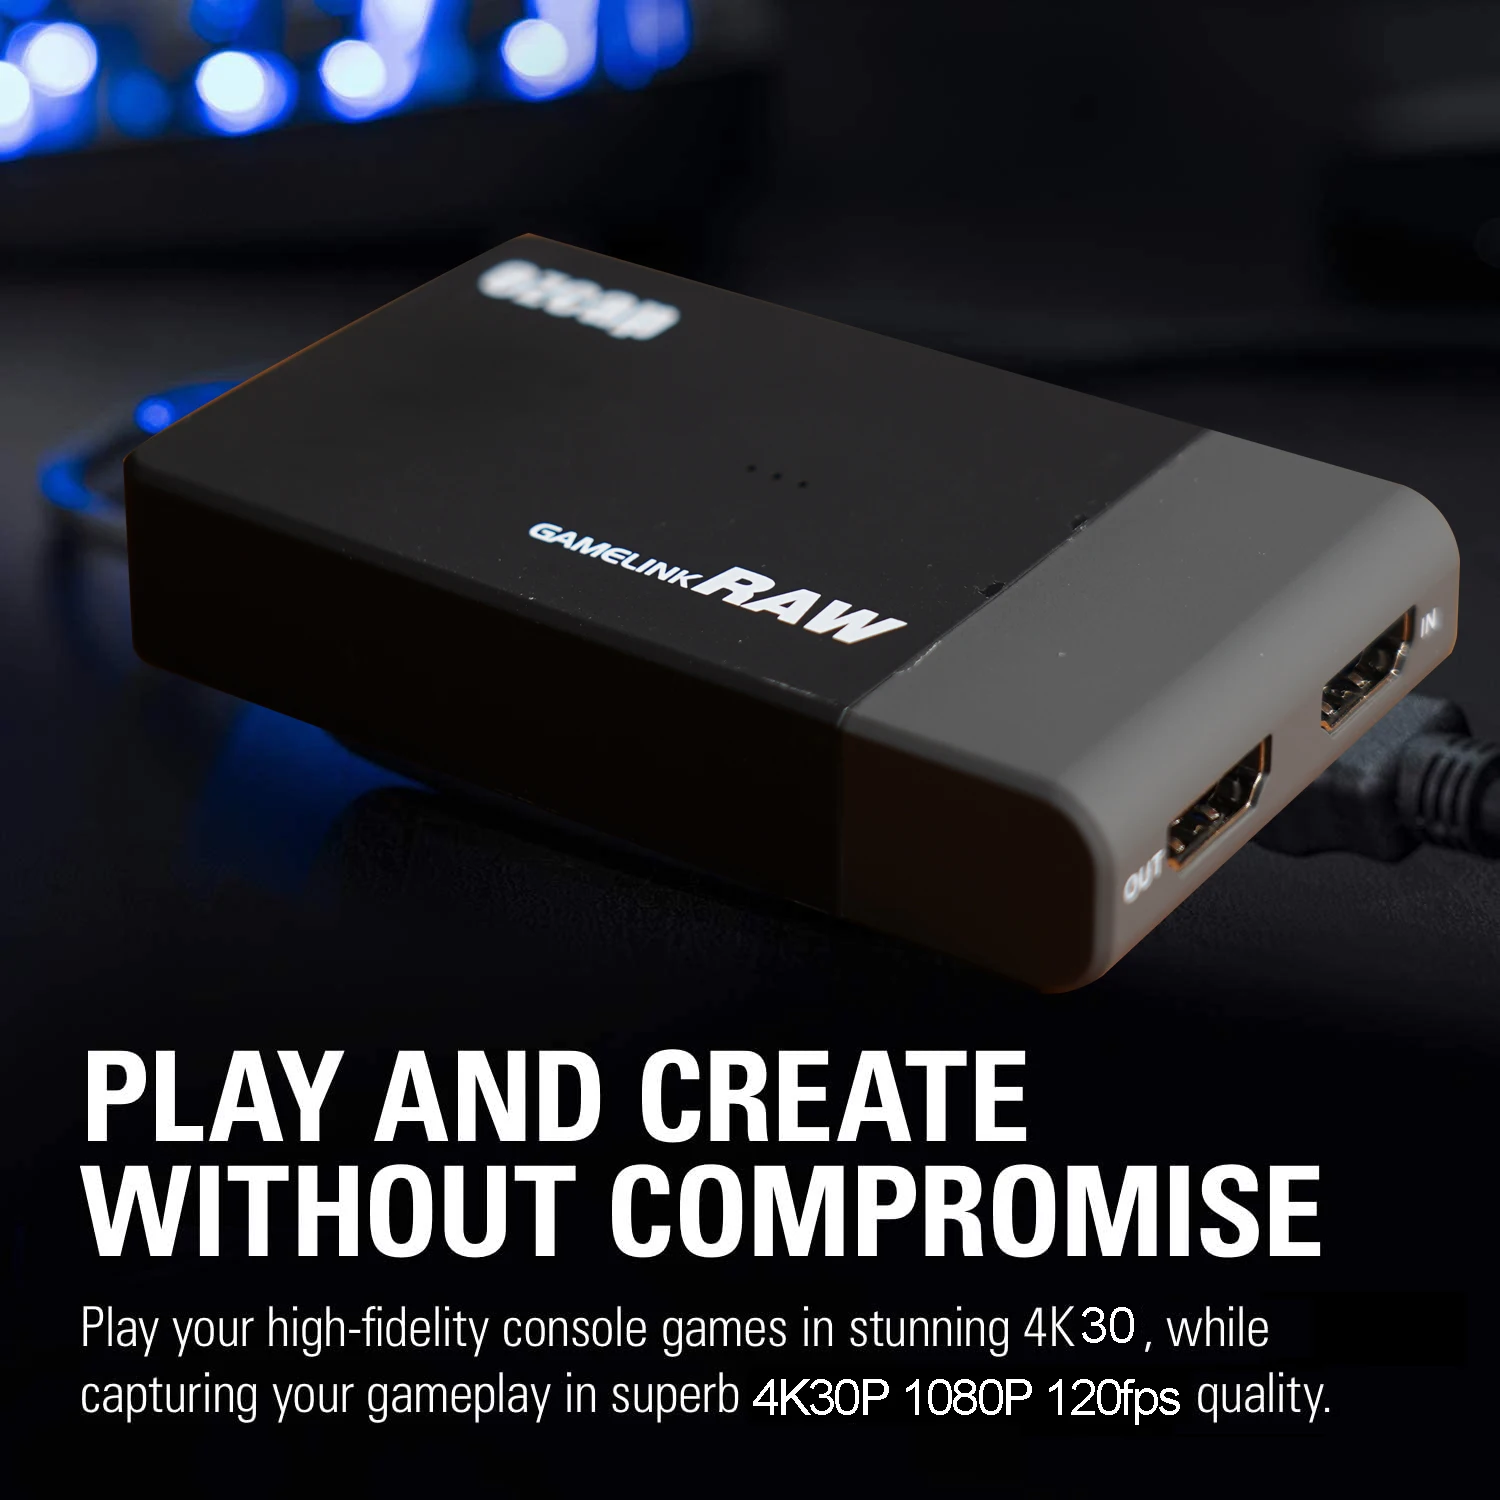 Real 4k 30hz 1080p 60fps 120fps USB 3.0 HDMI-compatible Video Capture Card Ultra HD Video Recording Device Live Streaming Box enlarge